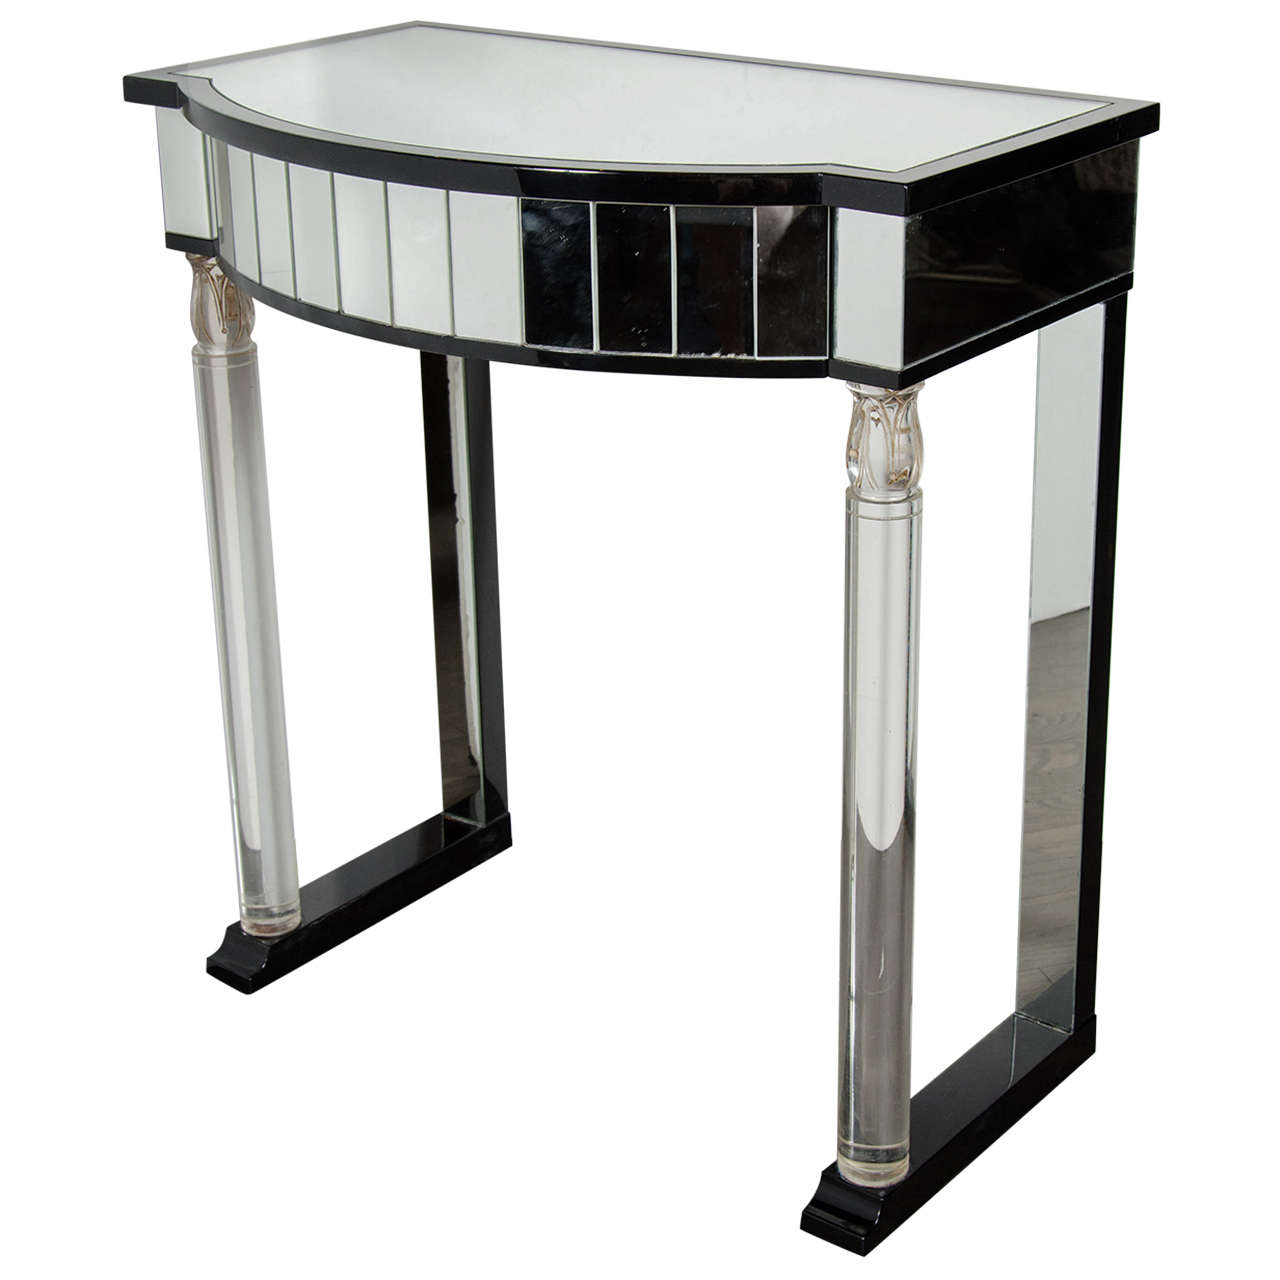 Exquisite Console Table in Ebonized Mahogany, Lucite and Mirror by Grosfeld House